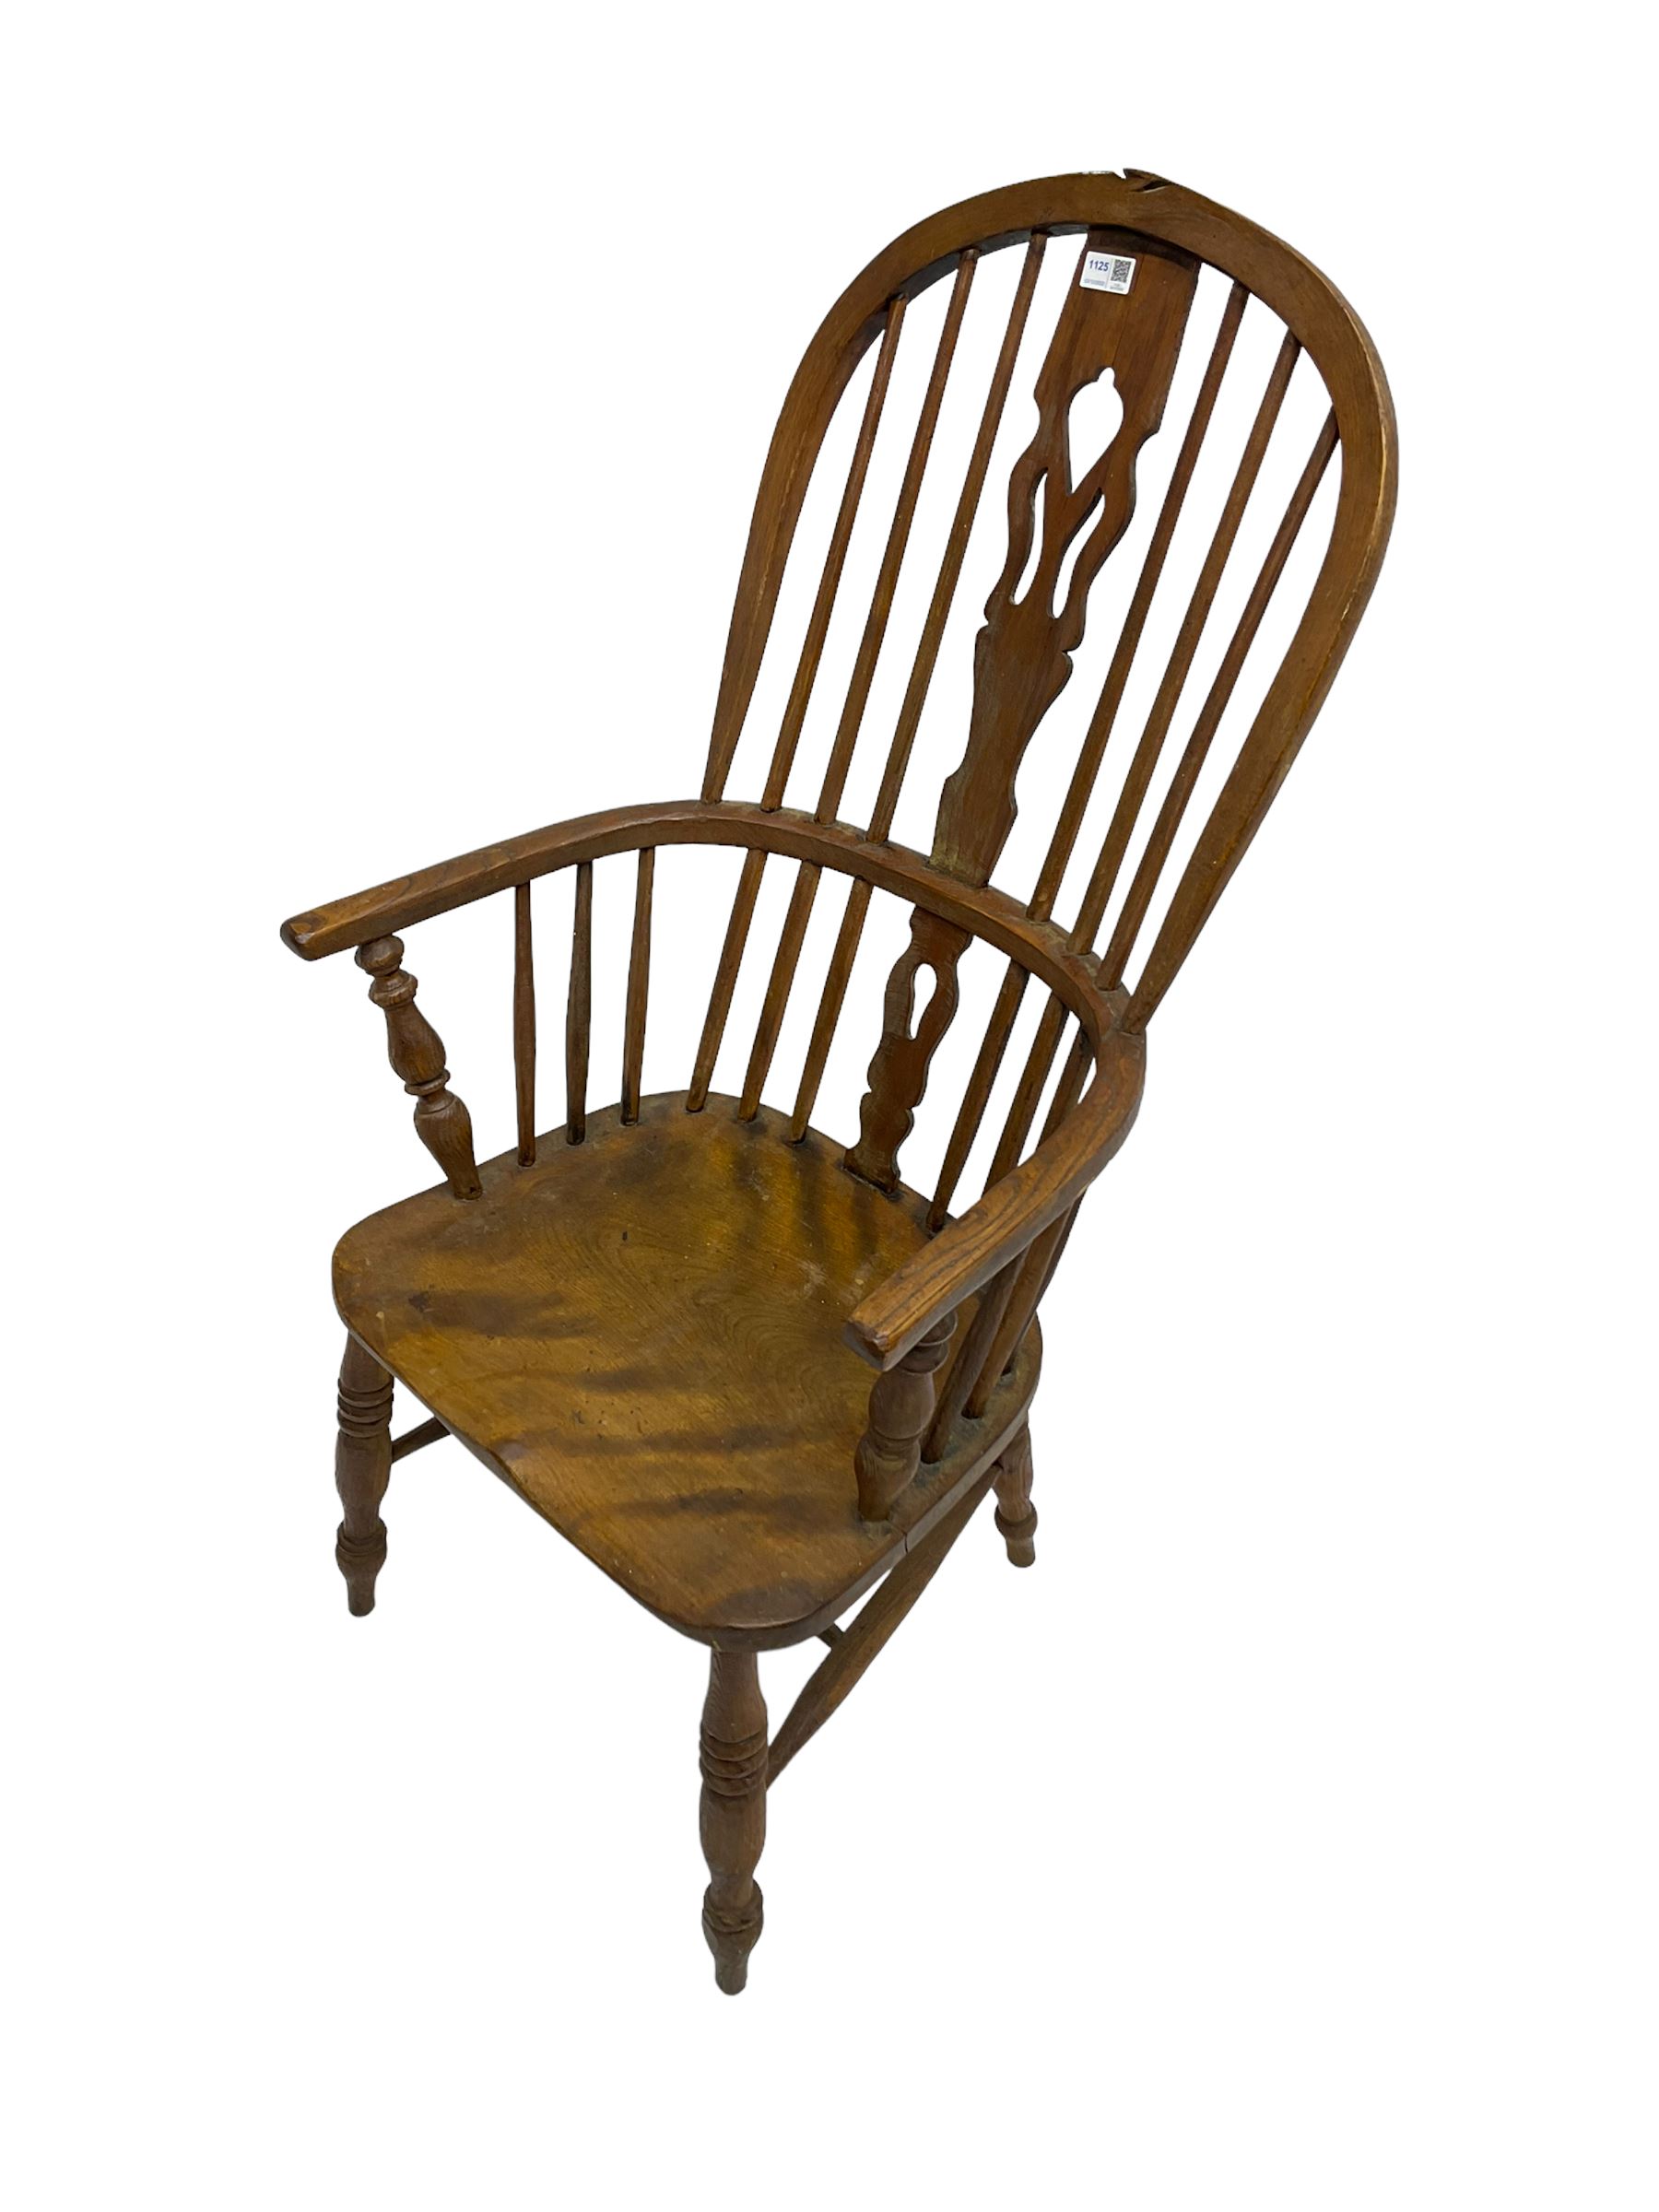 19th century elm and beech Windsor armchair - Image 4 of 6